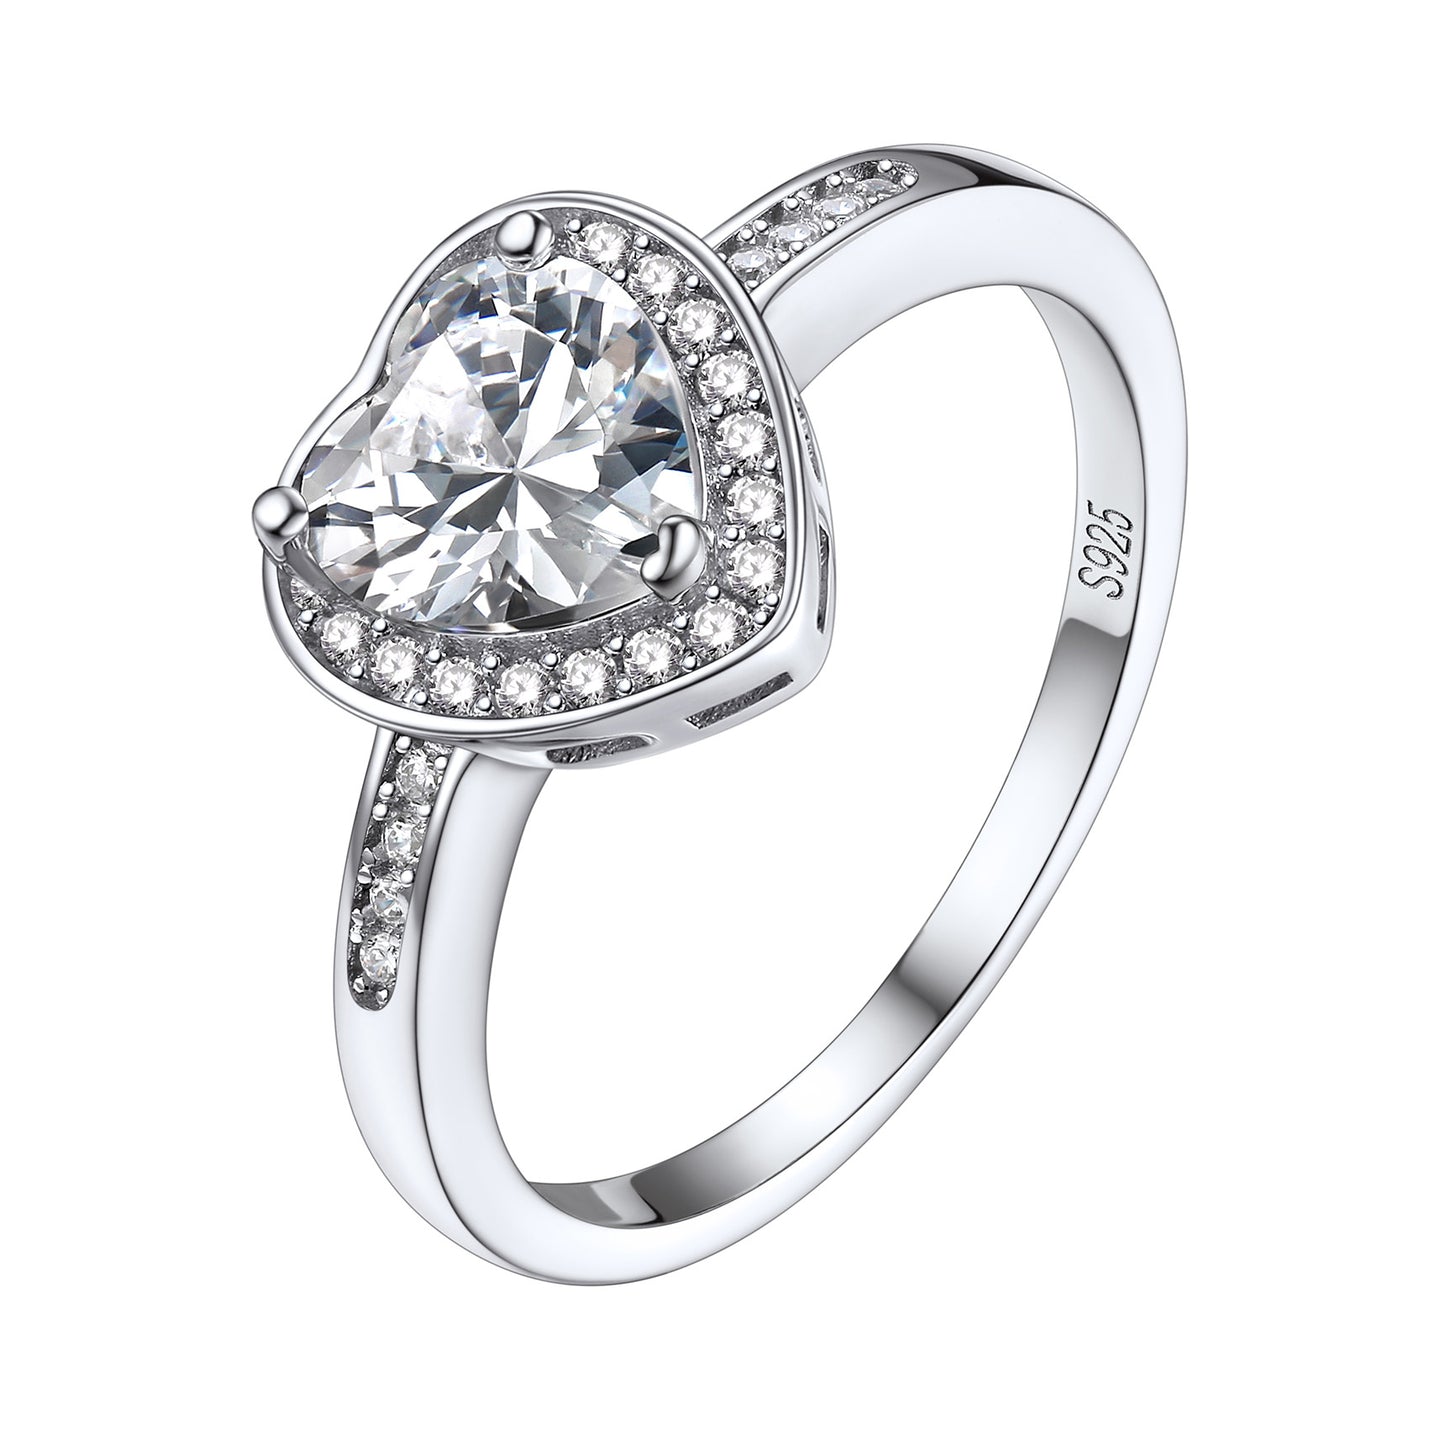 Sterling Silver Heart Cubic Zirconia Engagement Rings For Women